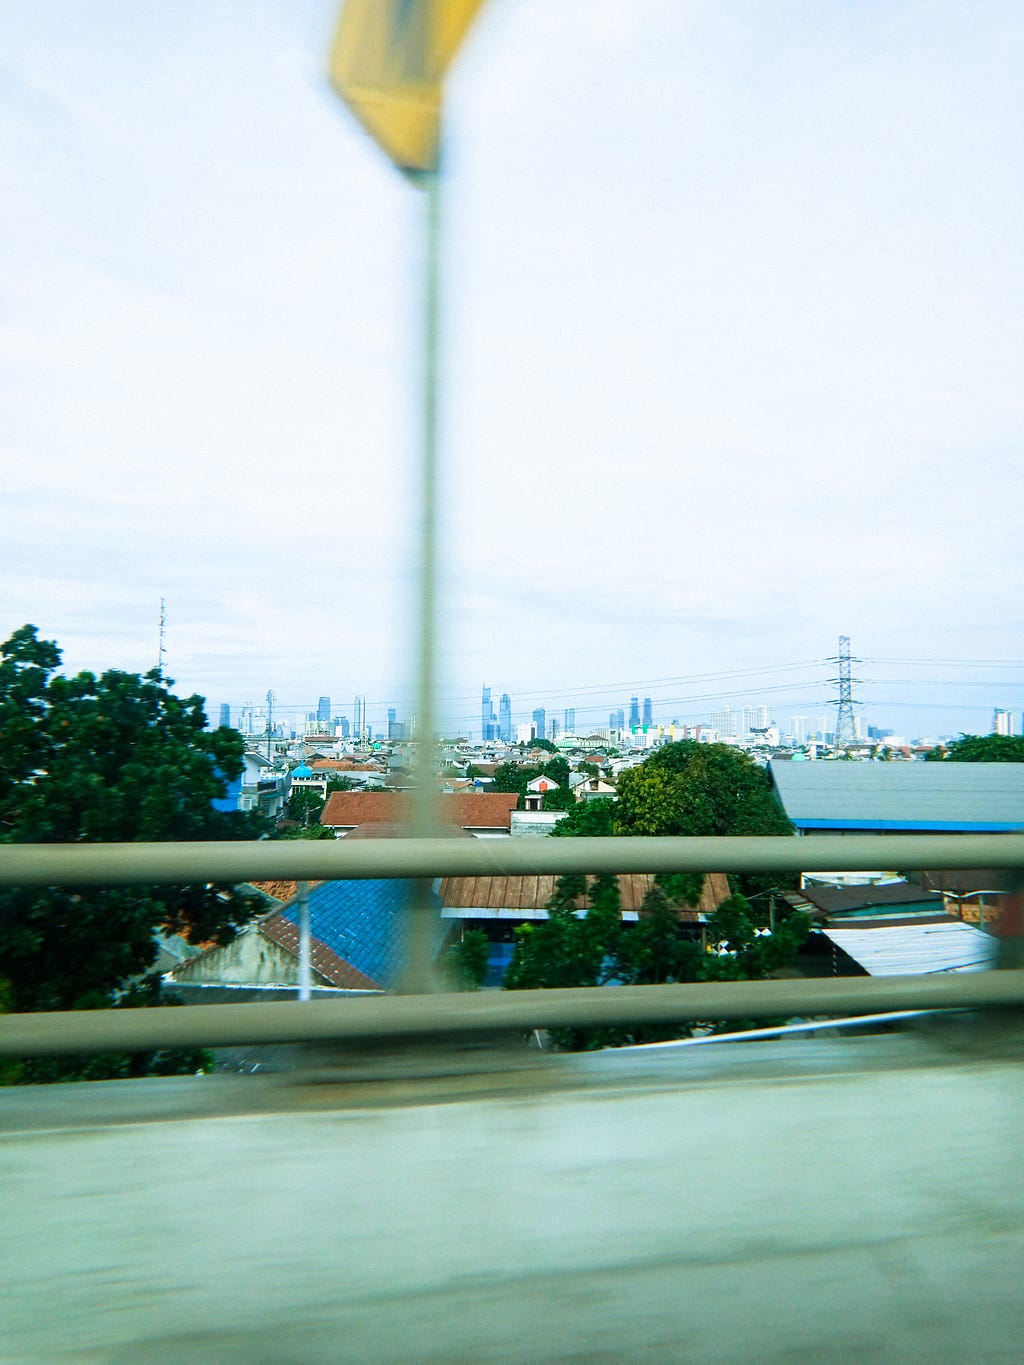 A view of the suburb taken from the highway